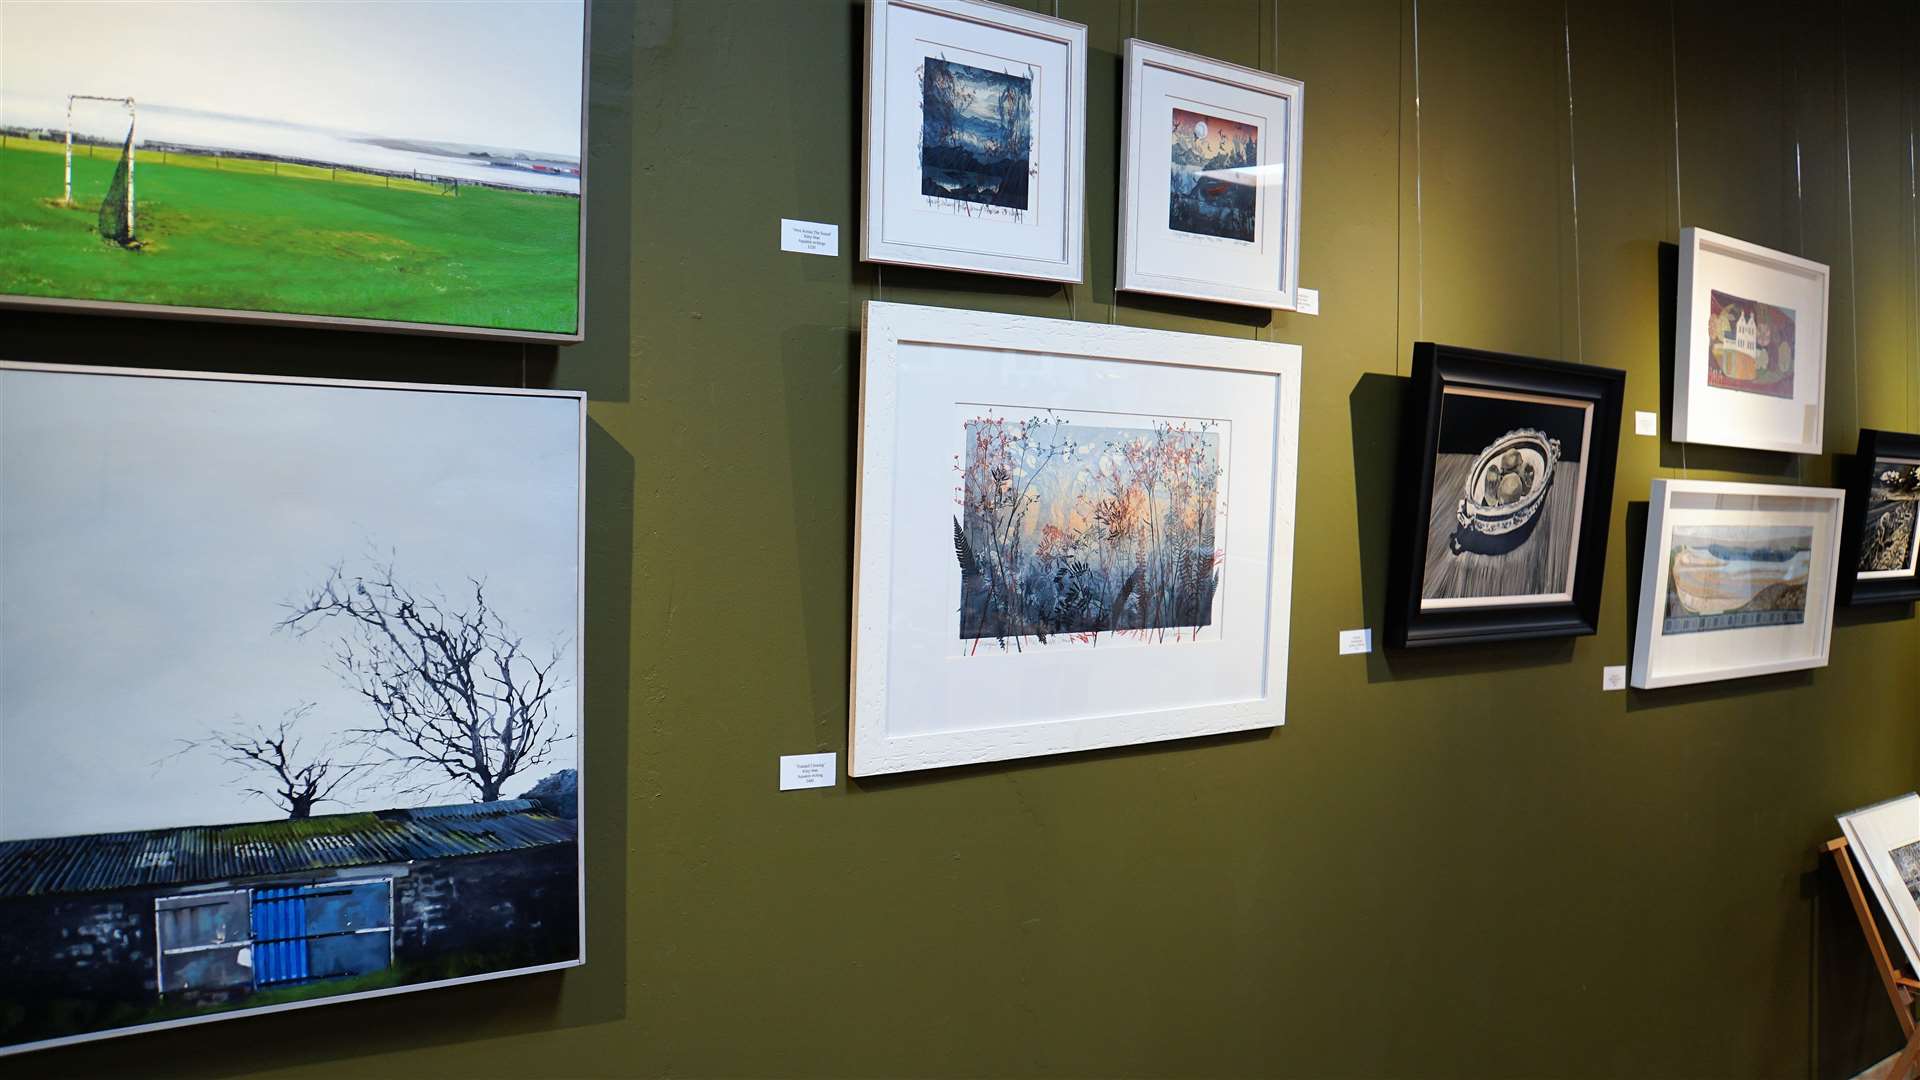 Some of the work by local artists including Helen Moore and Kitty Watt.